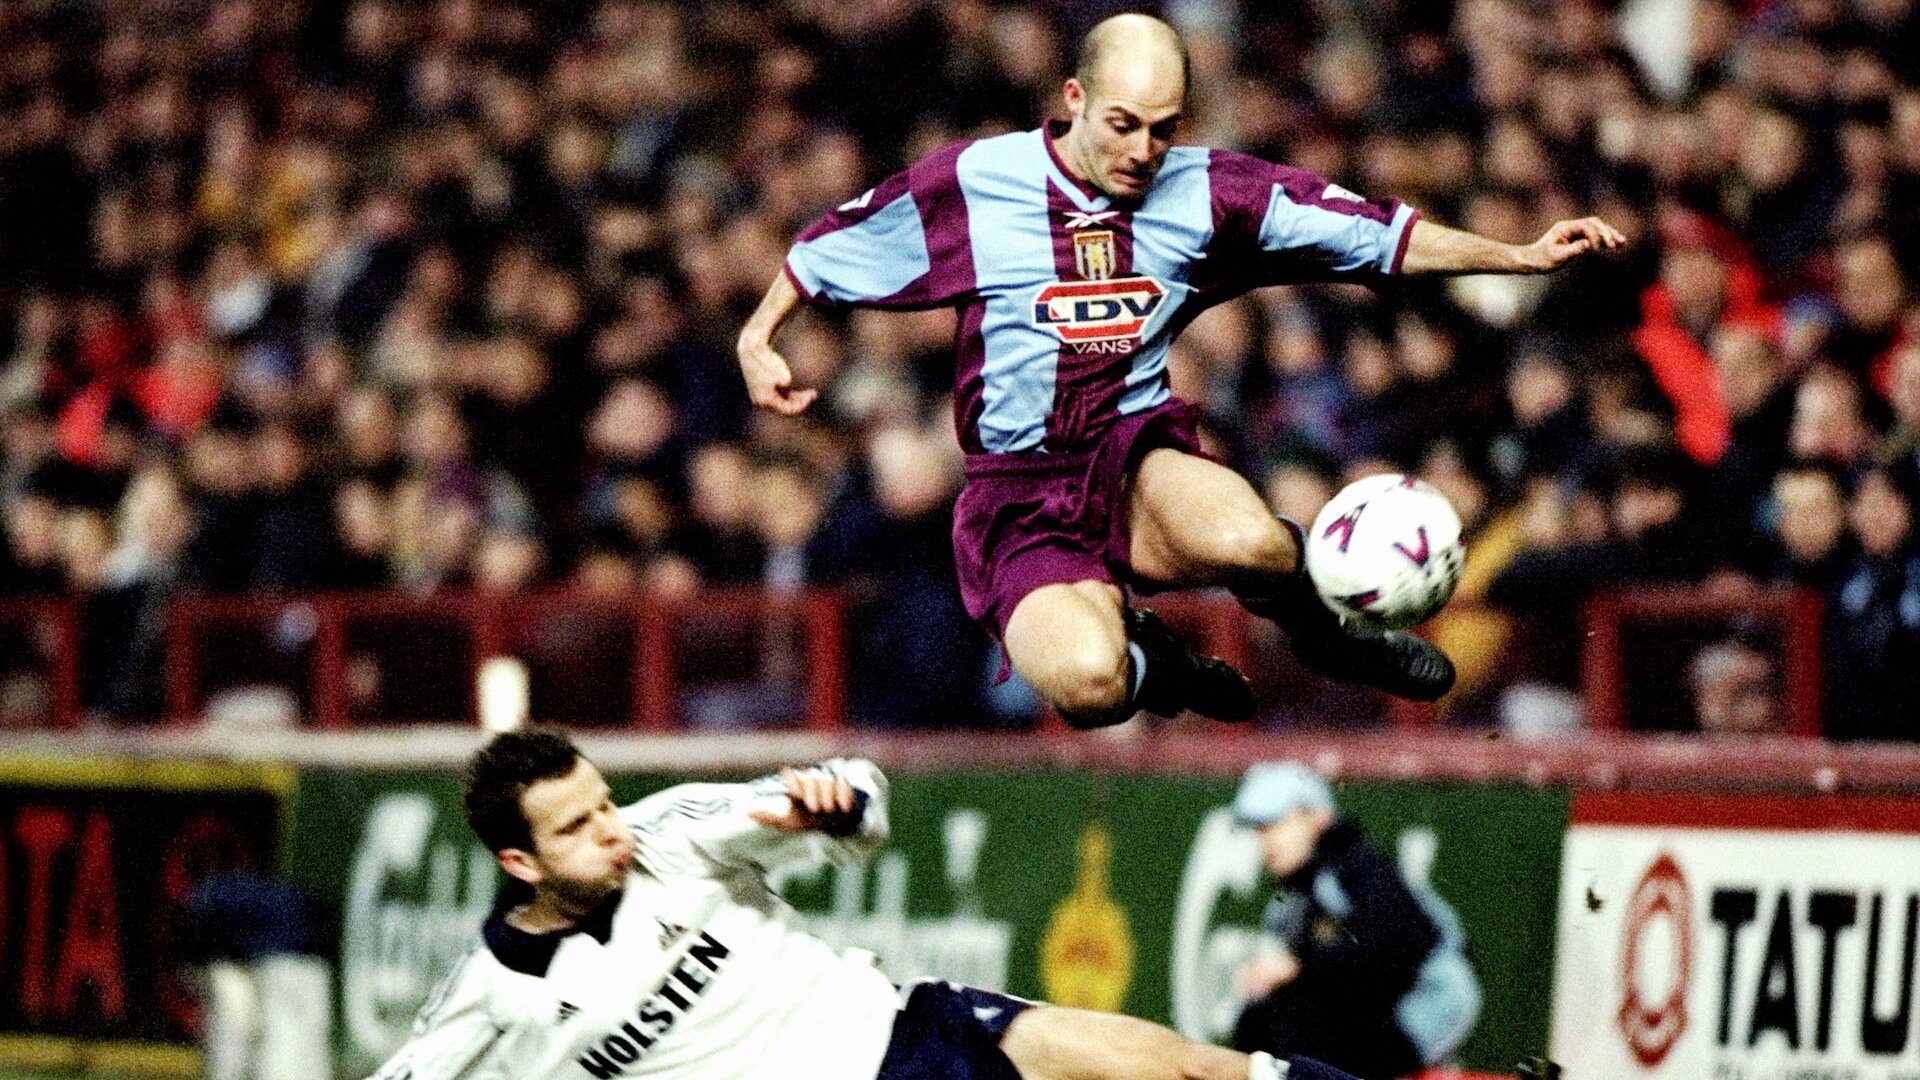 Aston Villa on Twitter: "Happy birthday to our former defender, Alan Wright! 🚀 https://t.co/zpsPSUHFvH" / Twitter